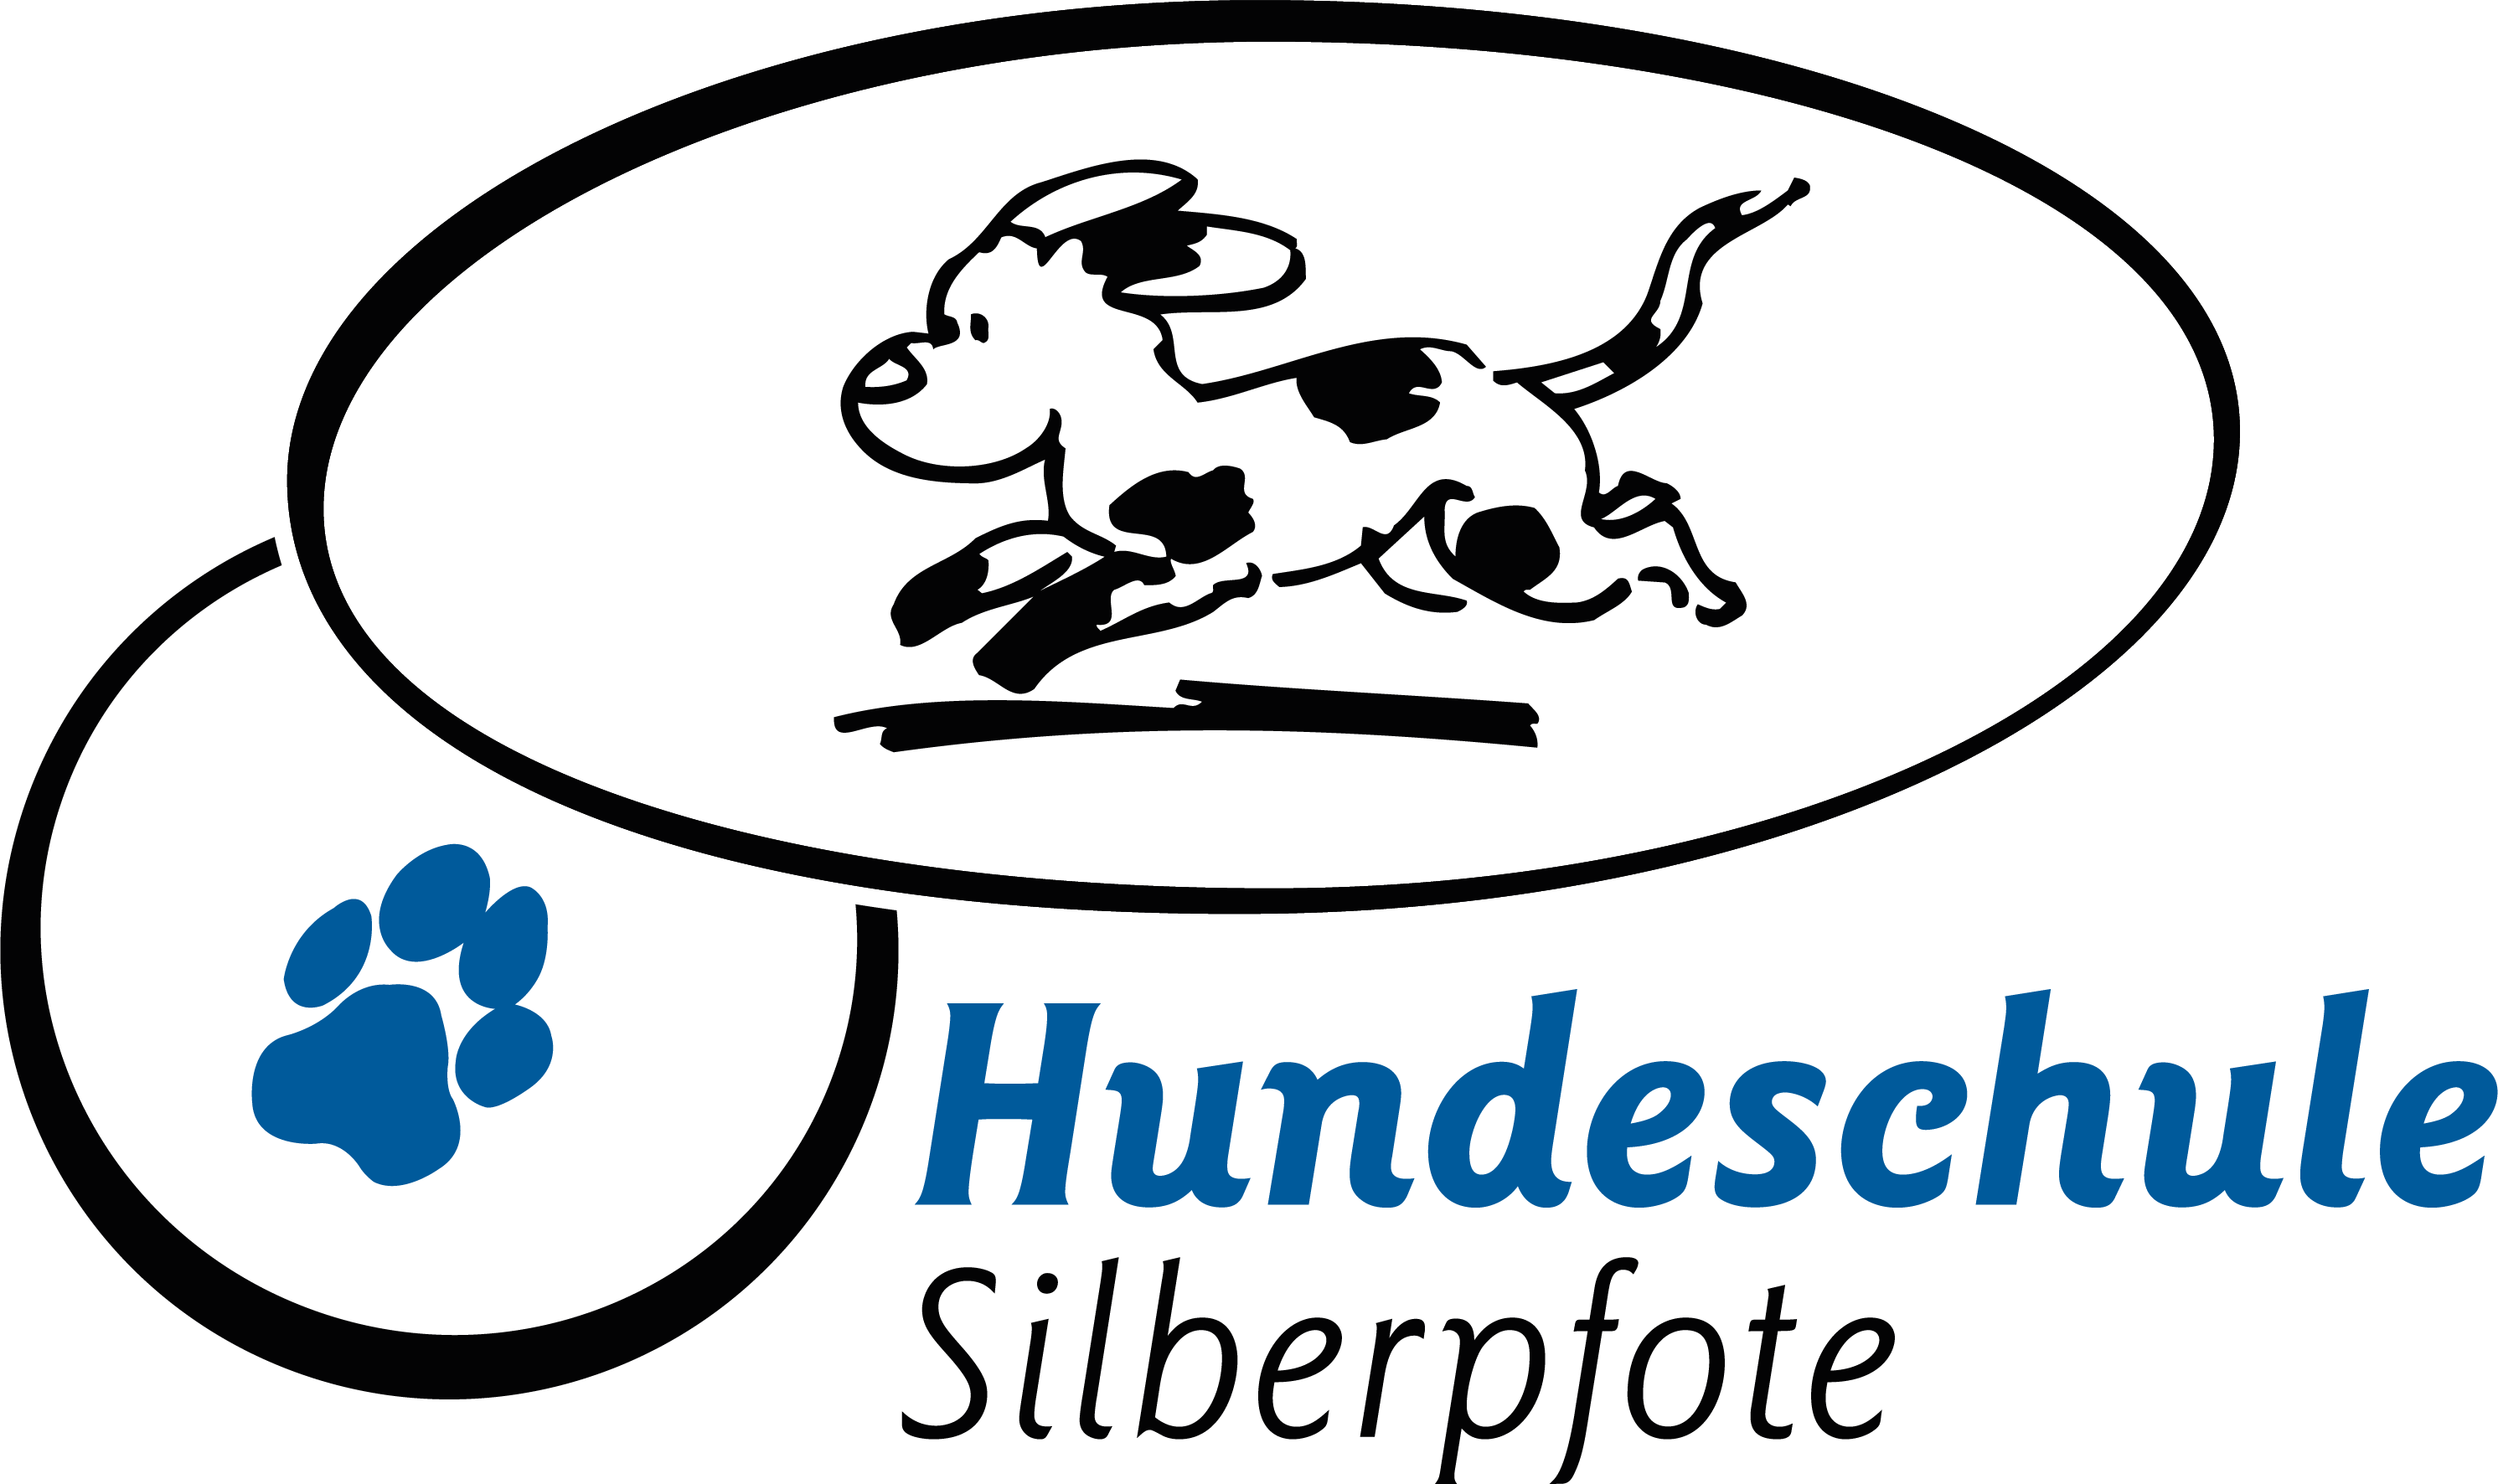 image-11832734-Hundeschule_Silberpfote-c9f0f.png